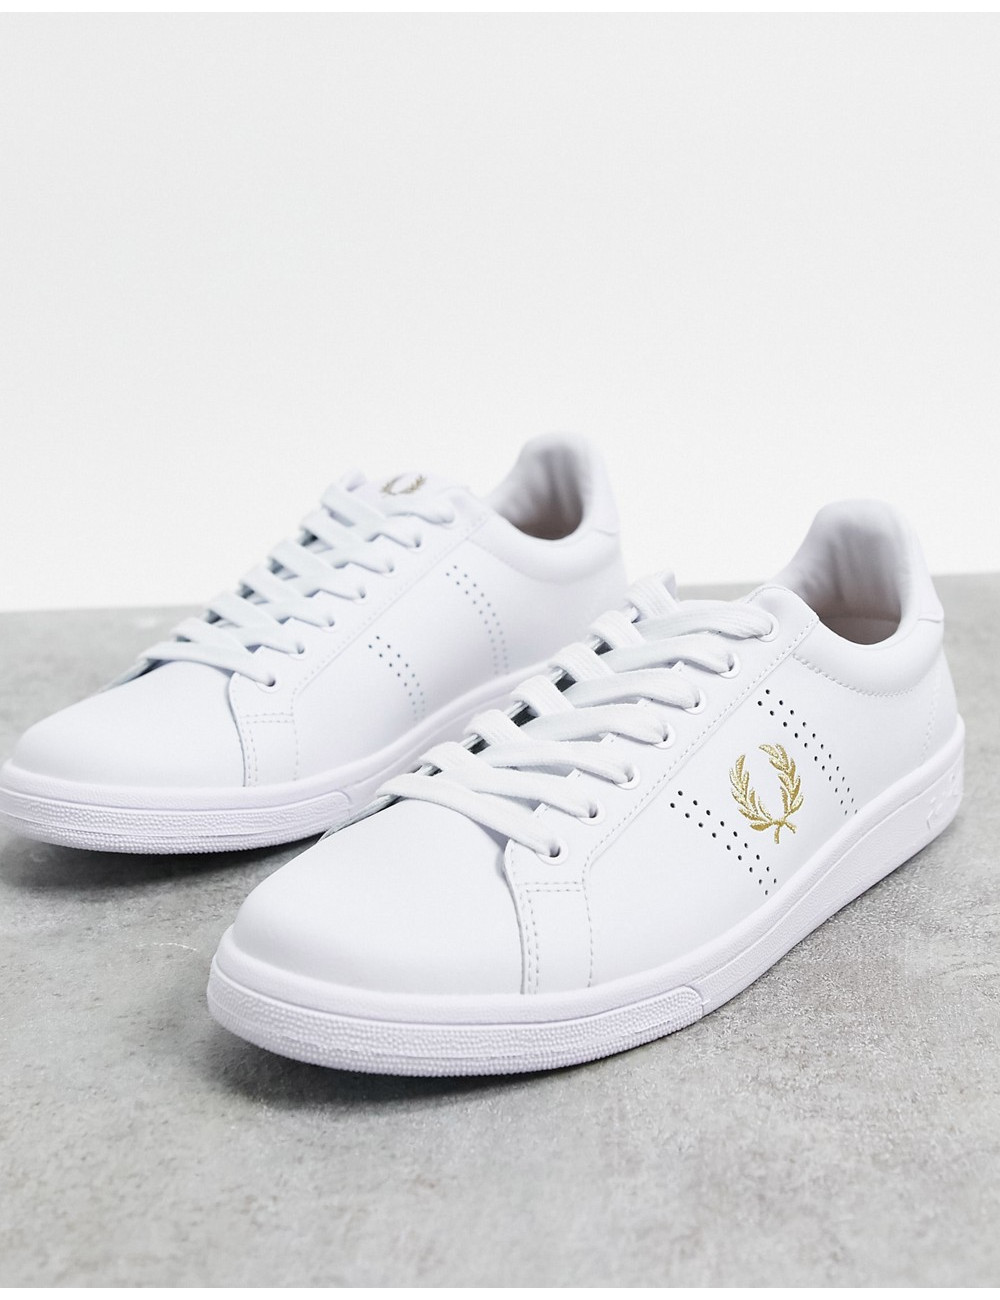 Fred Perry B721 gold detail...